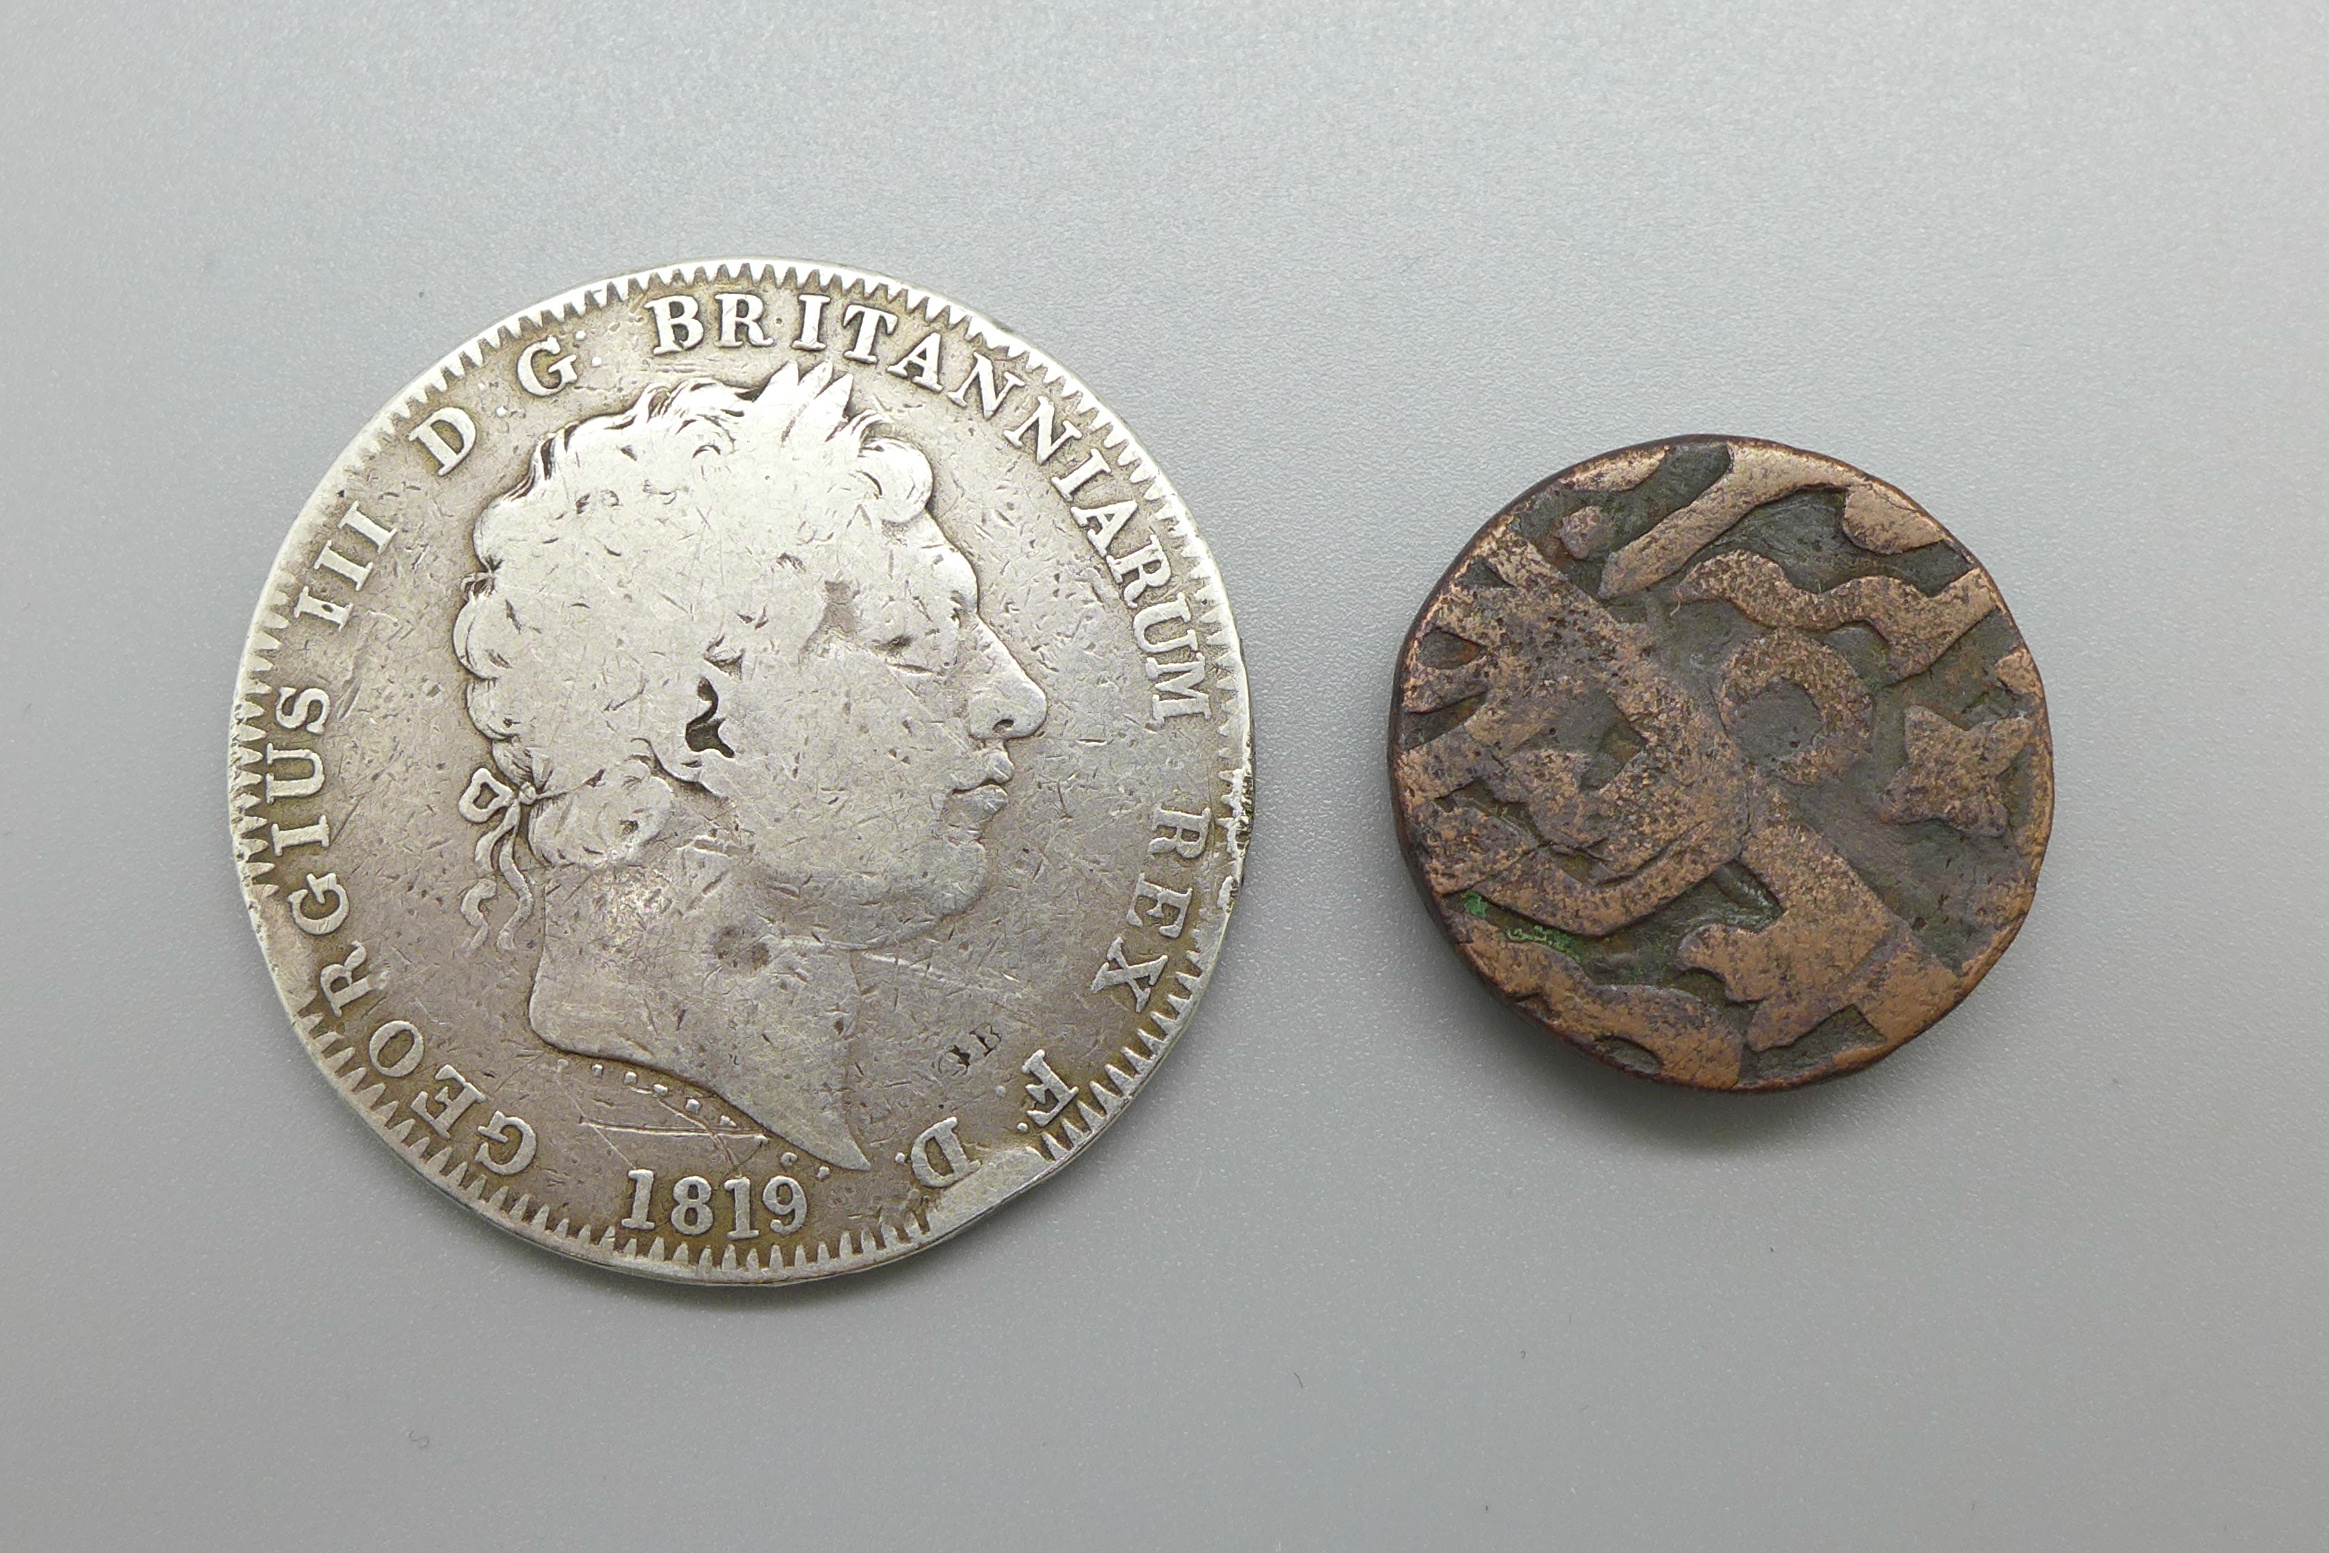 An 1819 George III silver crown and a foreign bronze coin